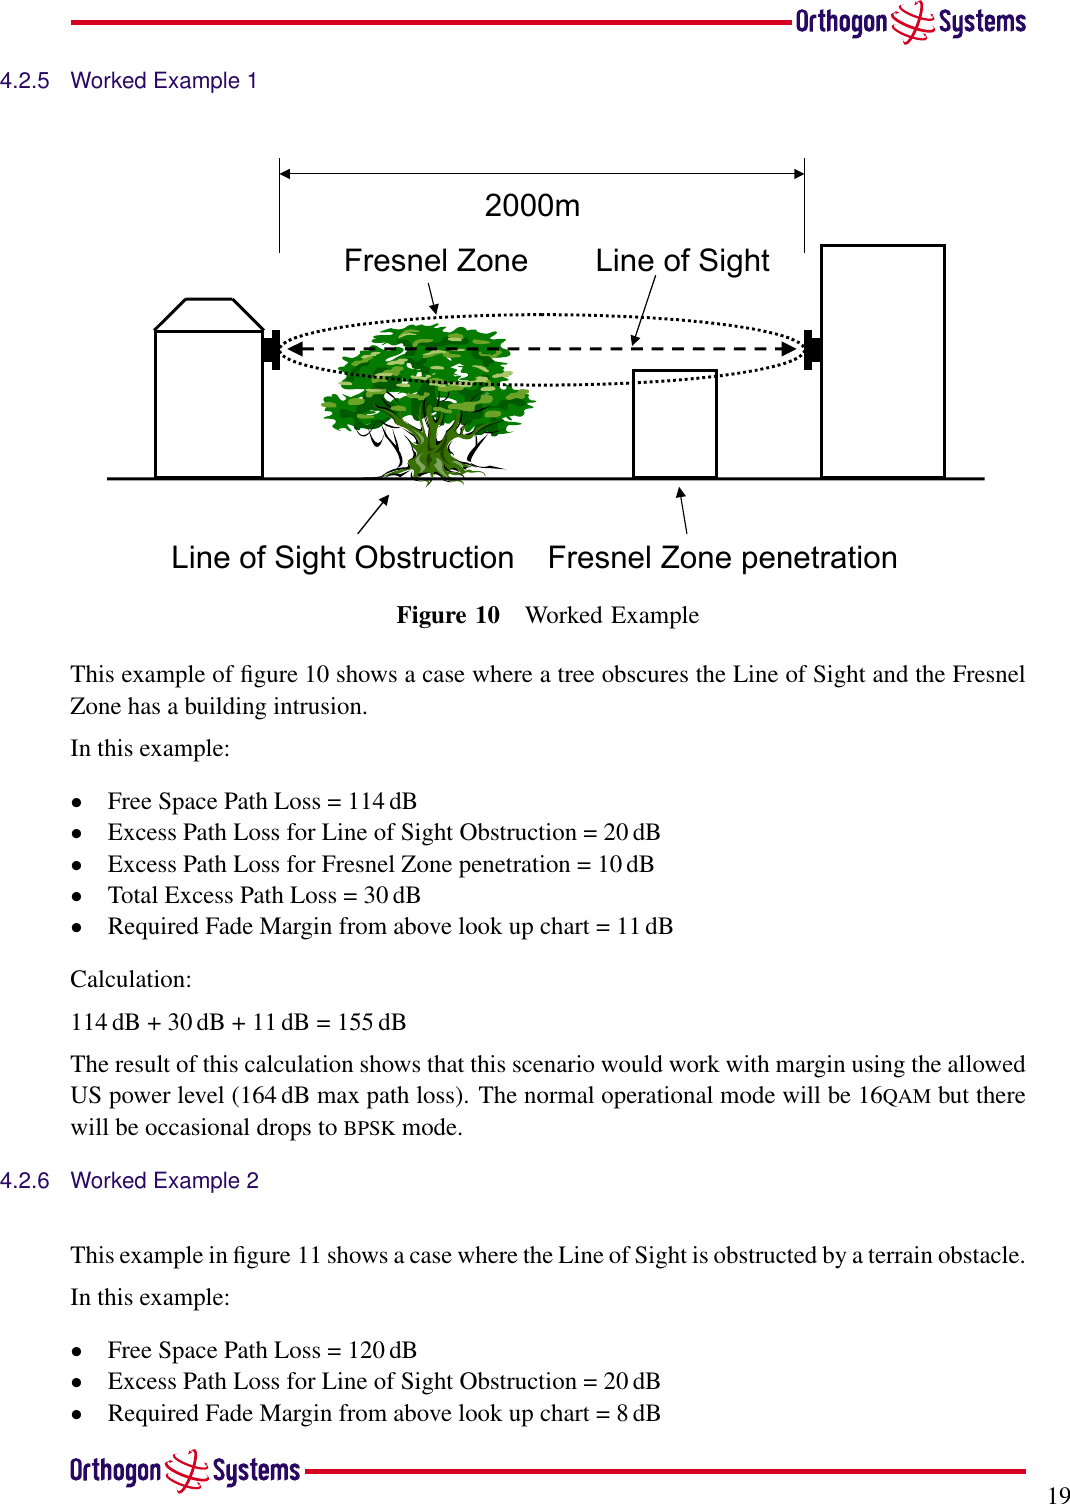 194.2.5 Worked Example 12000mFresnel ZoneLine of Sight Obstruction Fresnel Zone penetrationLine of SightFigure 10 Worked ExampleThis example of ﬁgure 10 shows a case where a tree obscures the Line of Sight and the FresnelZone has a building intrusion.In this example:•Free Space Path Loss = 114 dB•Excess Path Loss for Line of Sight Obstruction = 20 dB•Excess Path Loss for Fresnel Zone penetration = 10 dB•Total Excess Path Loss = 30dB•Required Fade Margin from above look up chart = 11 dBCalculation:114 dB + 30 dB + 11 dB = 155 dBThe result of this calculation shows that this scenario would work with margin using the allowedUS power level (164 dB max path loss). The normal operational mode will be 16QAM but therewill be occasional drops to BPSK mode.4.2.6 Worked Example 2This example in ﬁgure 11 shows a case where the Line of Sight is obstructed by a terrain obstacle.In this example:•Free Space Path Loss = 120 dB•Excess Path Loss for Line of Sight Obstruction = 20 dB•Required Fade Margin from above look up chart = 8 dB